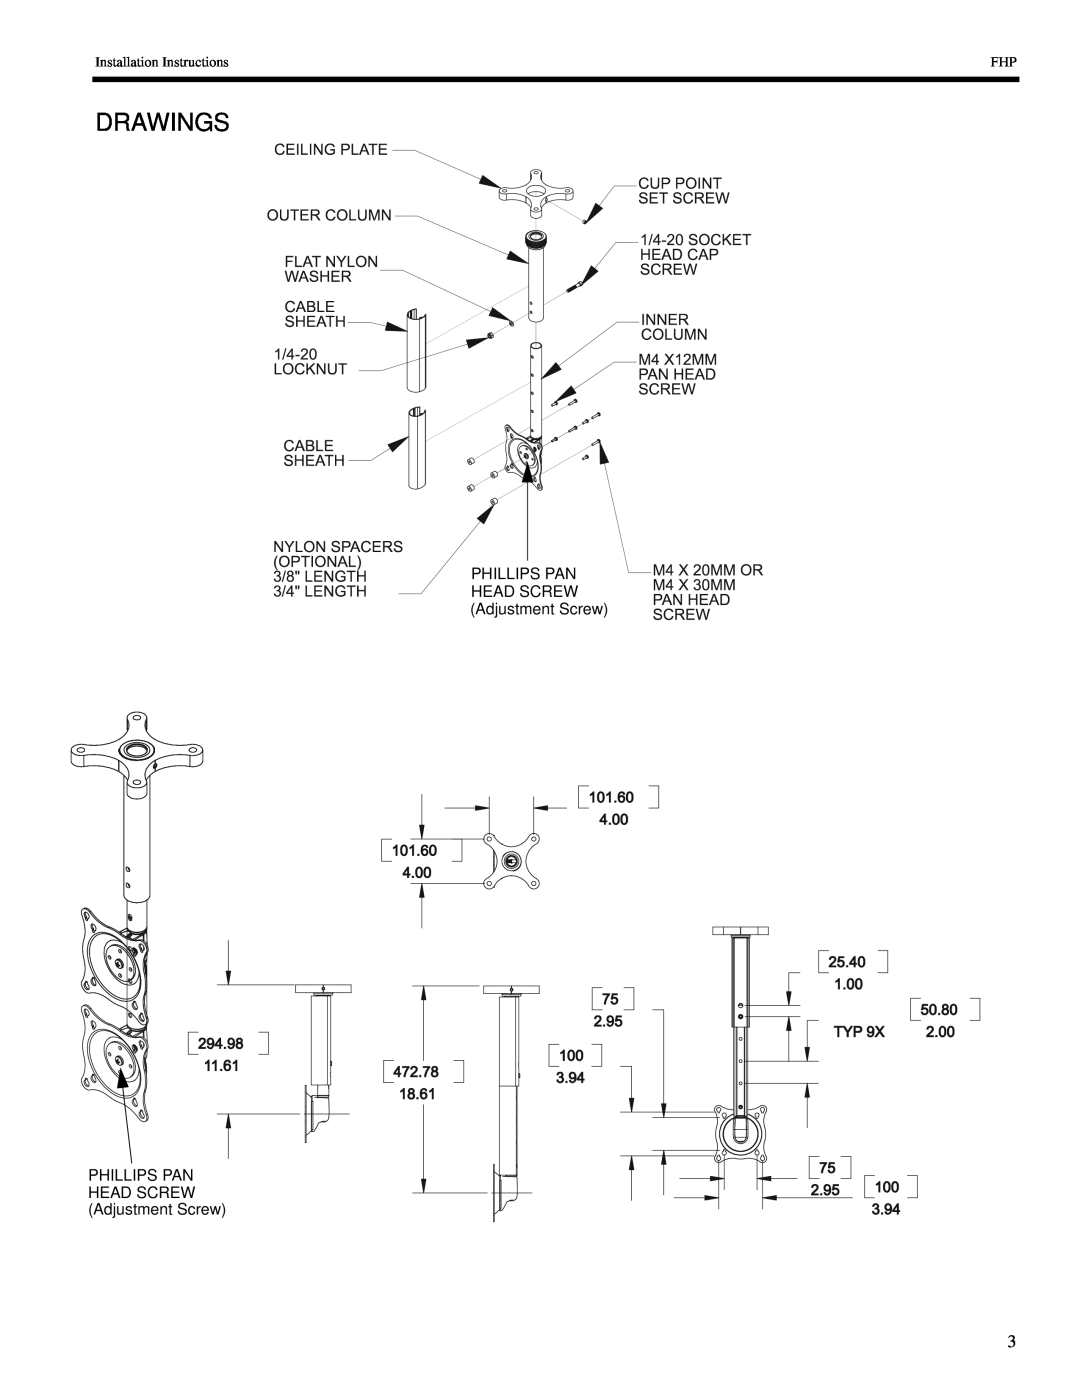 Chief Manufacturing FHP18-110 Drawings, PHILLIPS PAN HEAD SCREW Adjustment Screw, Installation Instructions 